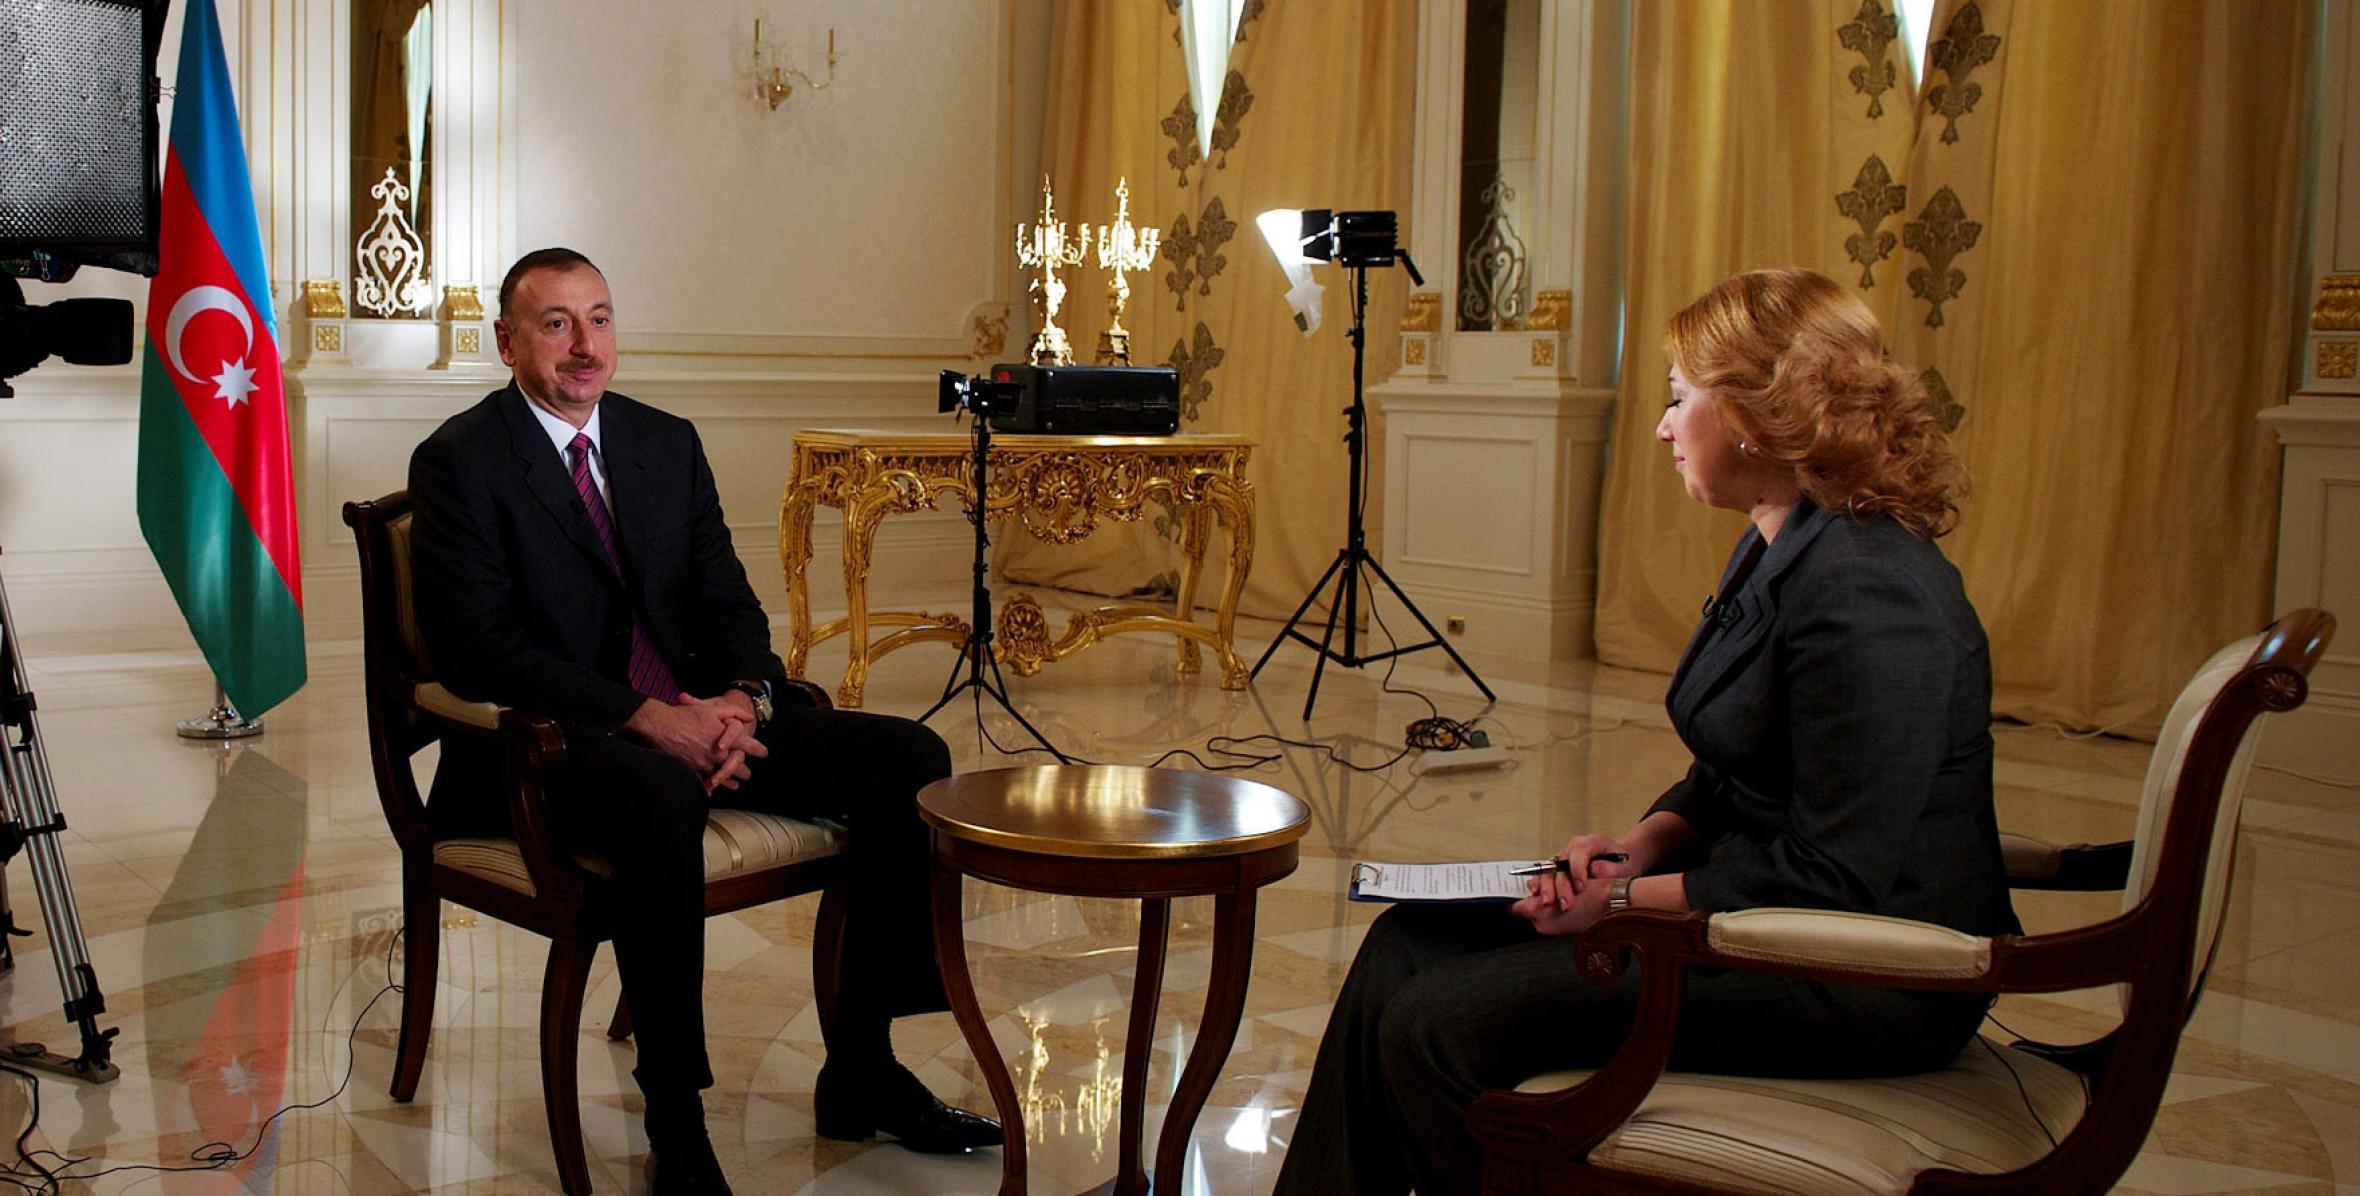 Ilham Aliyev was interviewed by Interstate Television and Radio Company Mir